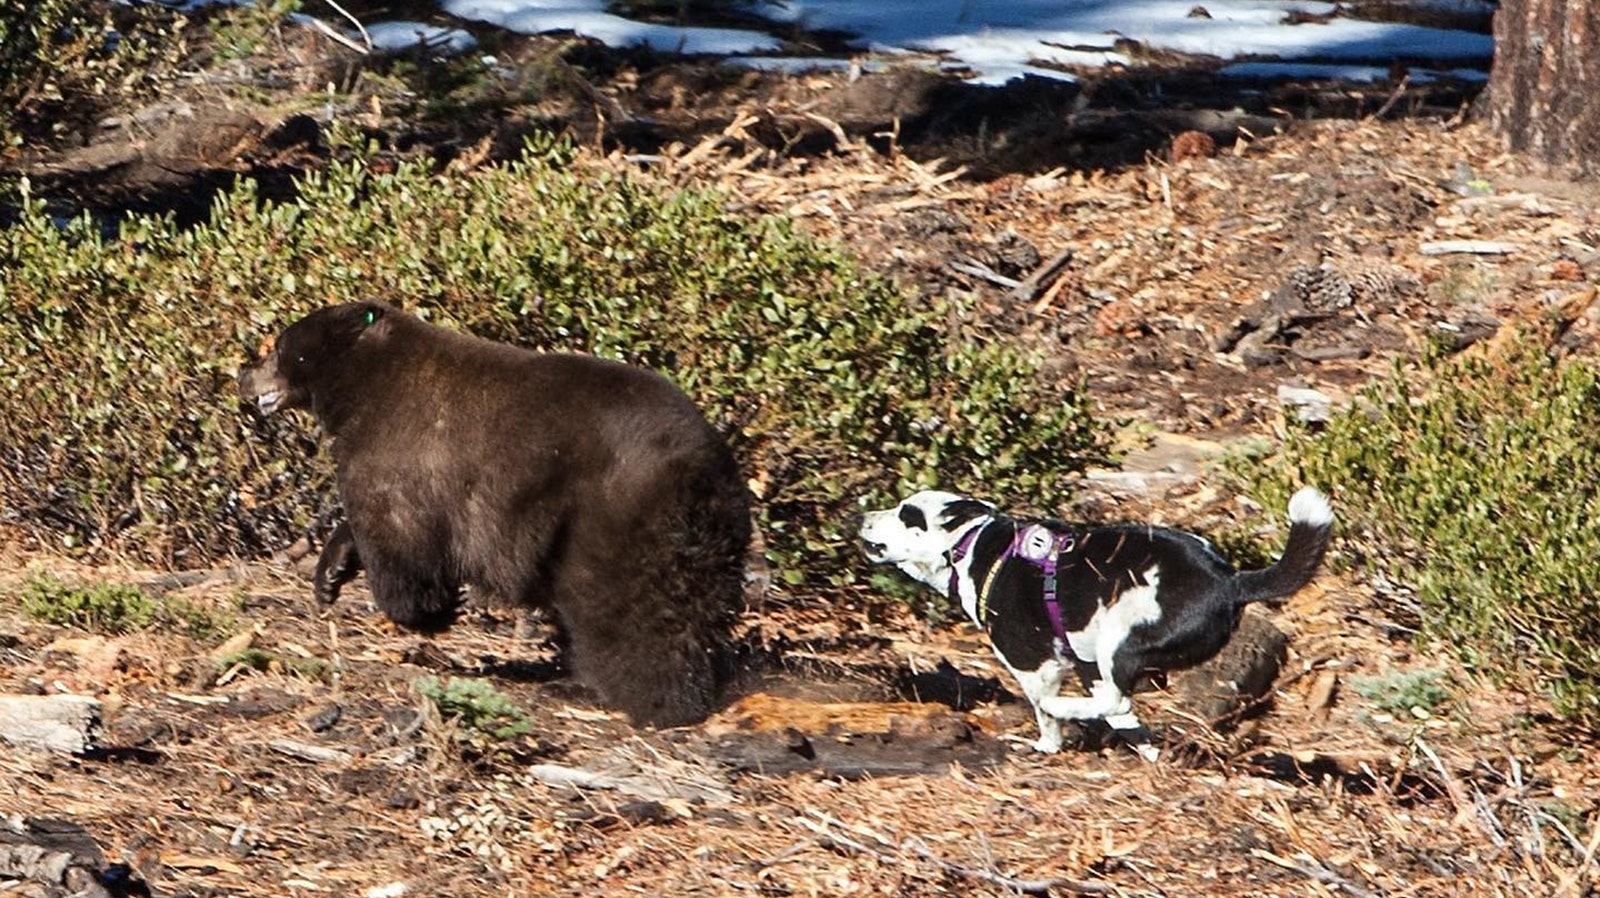 Karelian Bear Dogs can be trained to “shepherd” bears away from potential trouble spots, such as campgrounds.